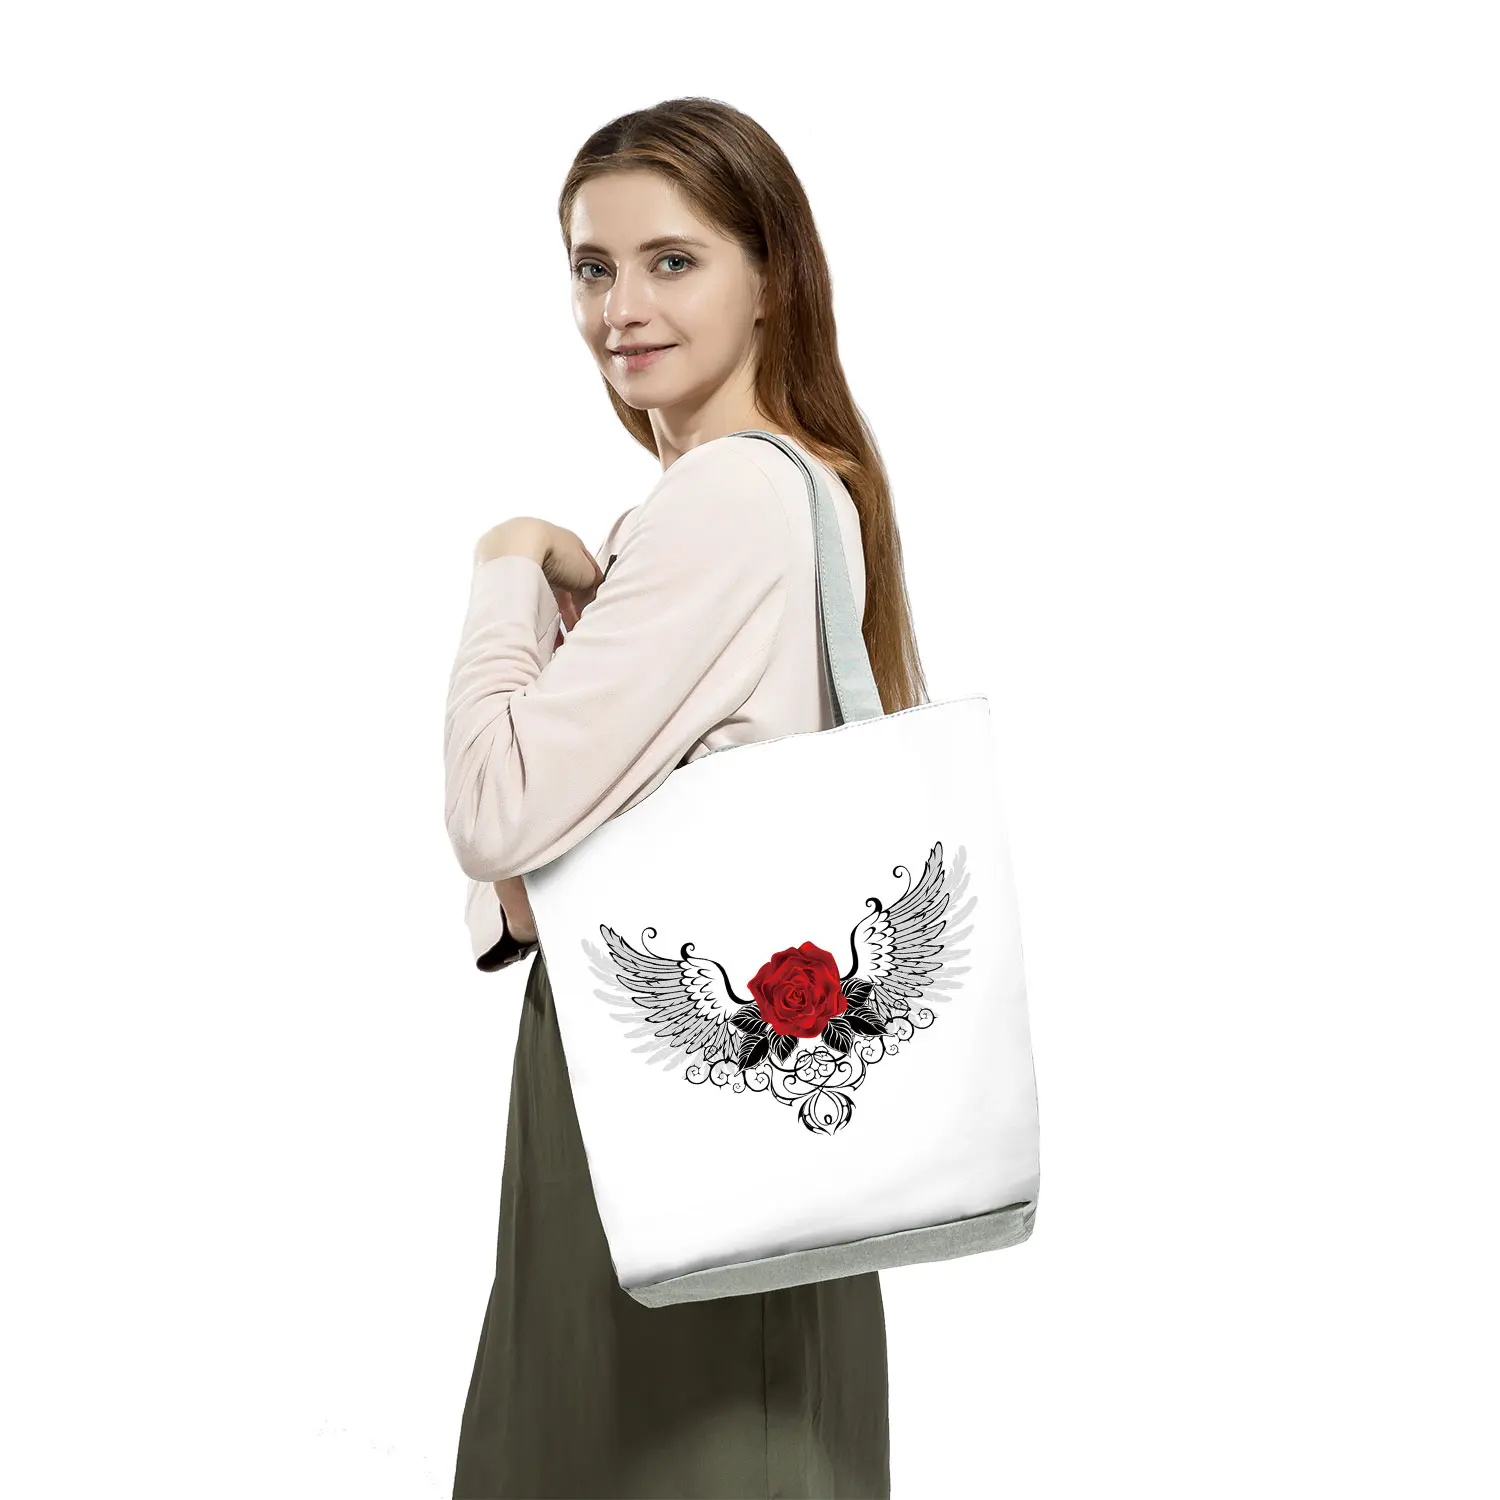 New Fashion Floral Women Black Handbags Red Rose Musical Note Print Tote Graphic Shoulder Bag Female Ladies Casual Shopping Bag